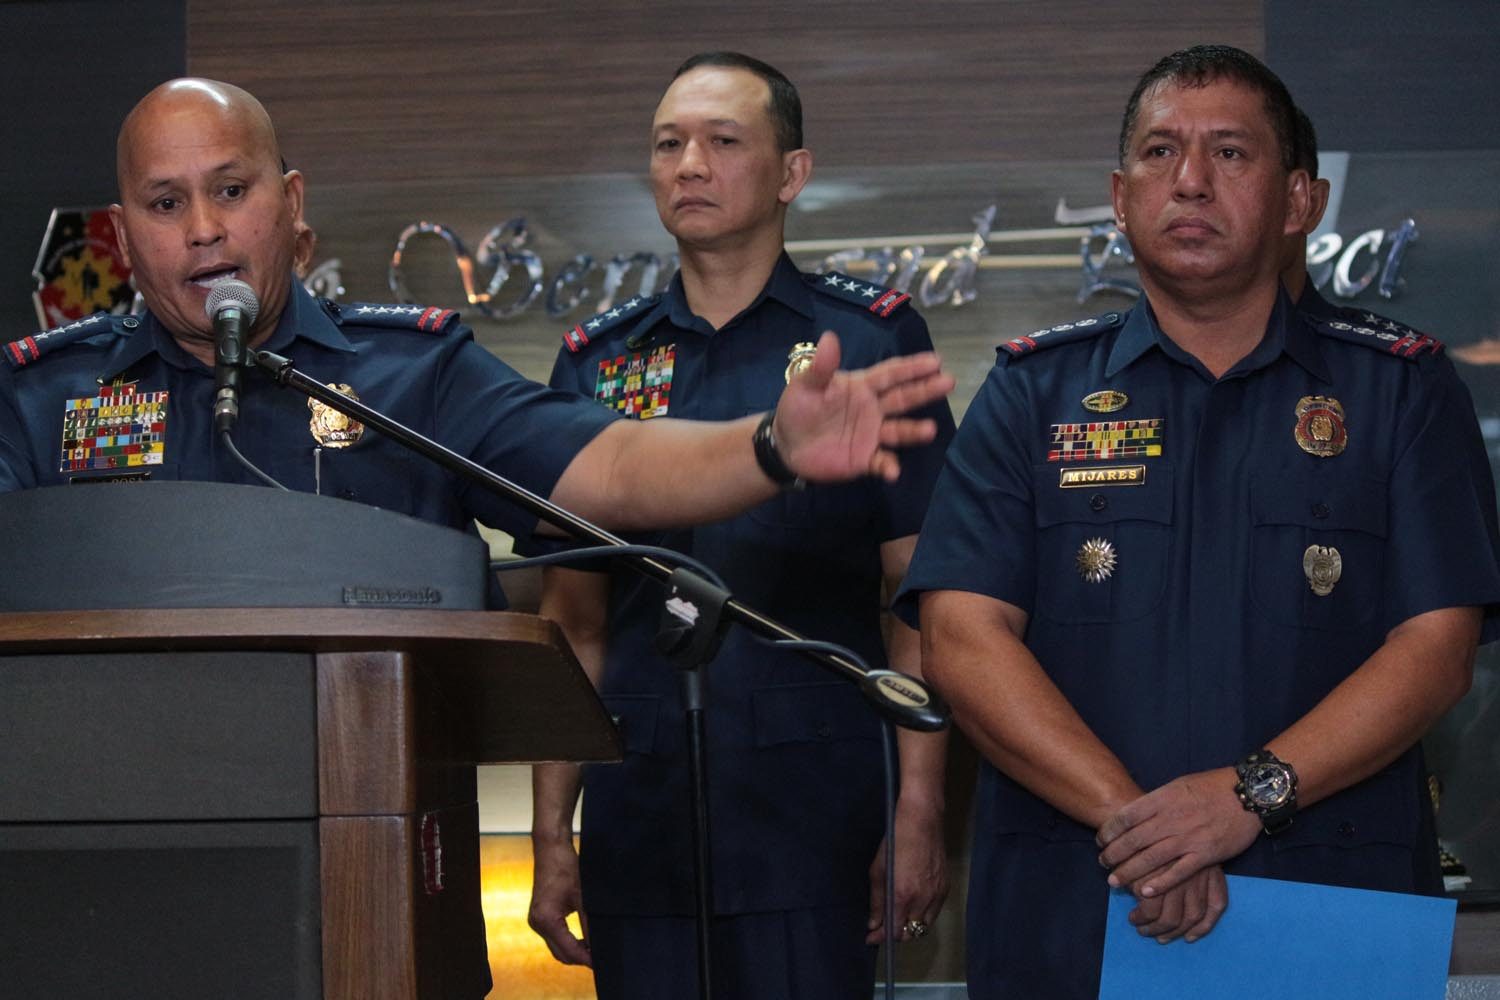 PNP relaunches war on drugs, vows ‘less bloody’ campaign